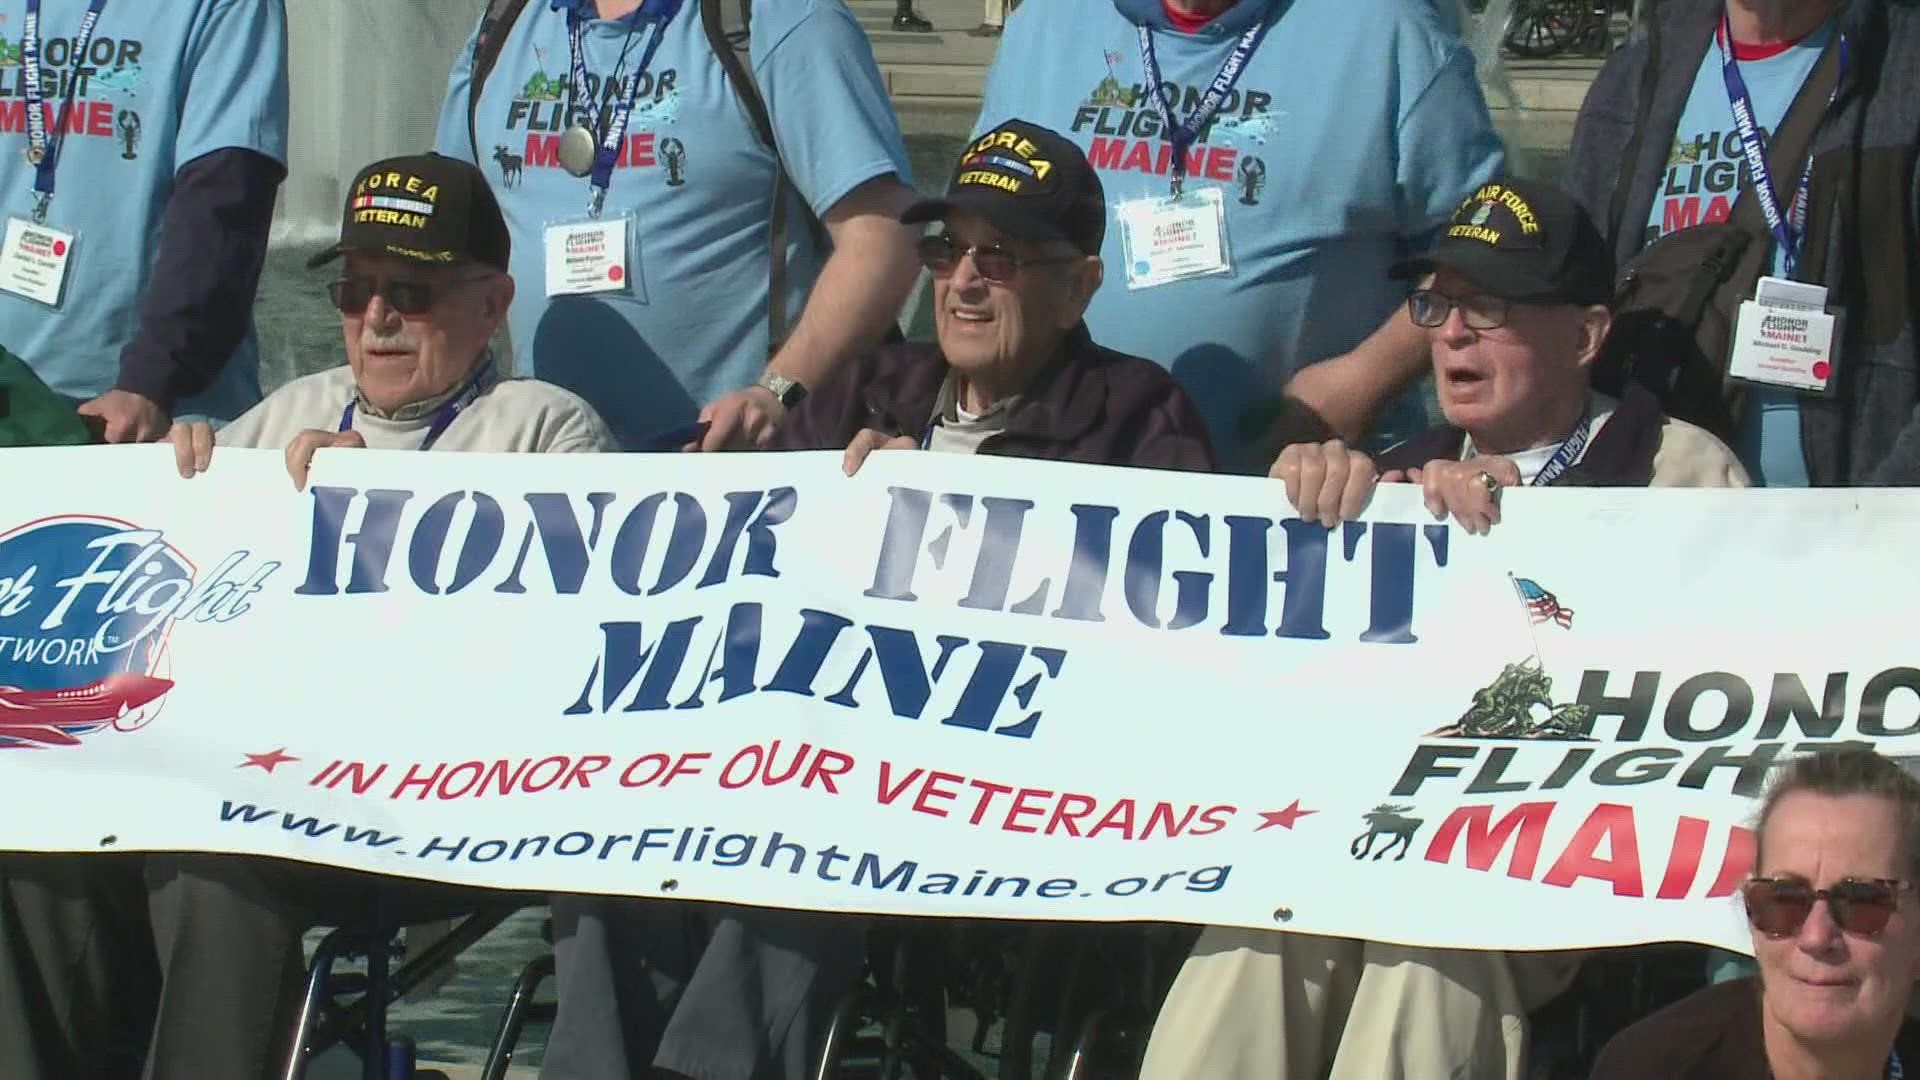 NEWS CENTER Maine's Don Carrigan discusses the impact Honor Flight trips have had on Maine veterans.